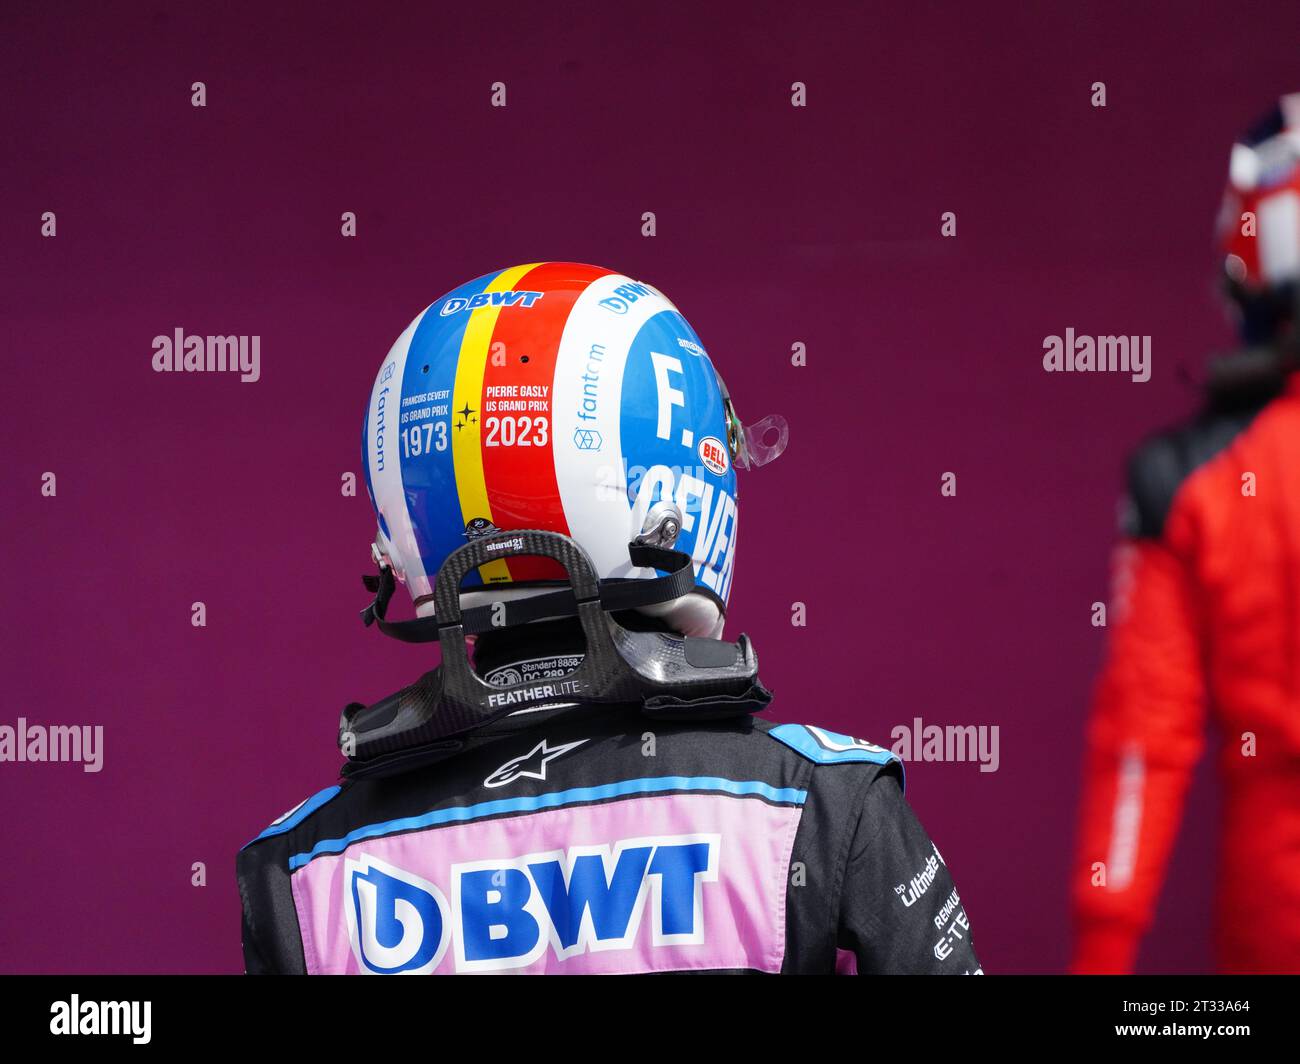 AUSTIN, TEXAS, USA on 21. OCTOBER 2023; #10, Pierre GASLY, FRA, Alpine F1 Team with a helmet in the design of Francois Cevert, F1 Tyrrell pilot who died in a crash during the US GP in Watkins Glen 1973. seen during the F1 Grand Prix in Austin, TEXAS, USA 2023, circuit of the Americas, US F1 GP, Formel 1, Formule 1 - Formula One Grand Prix on October 21 in Austin Texas - fee liable image - Photo Credit: © Haopeng ZHANG/ATP images (ZHANG Haopeng /ATP/SPP) Credit: SPP Sport Press Photo. /Alamy Live News Stock Photo